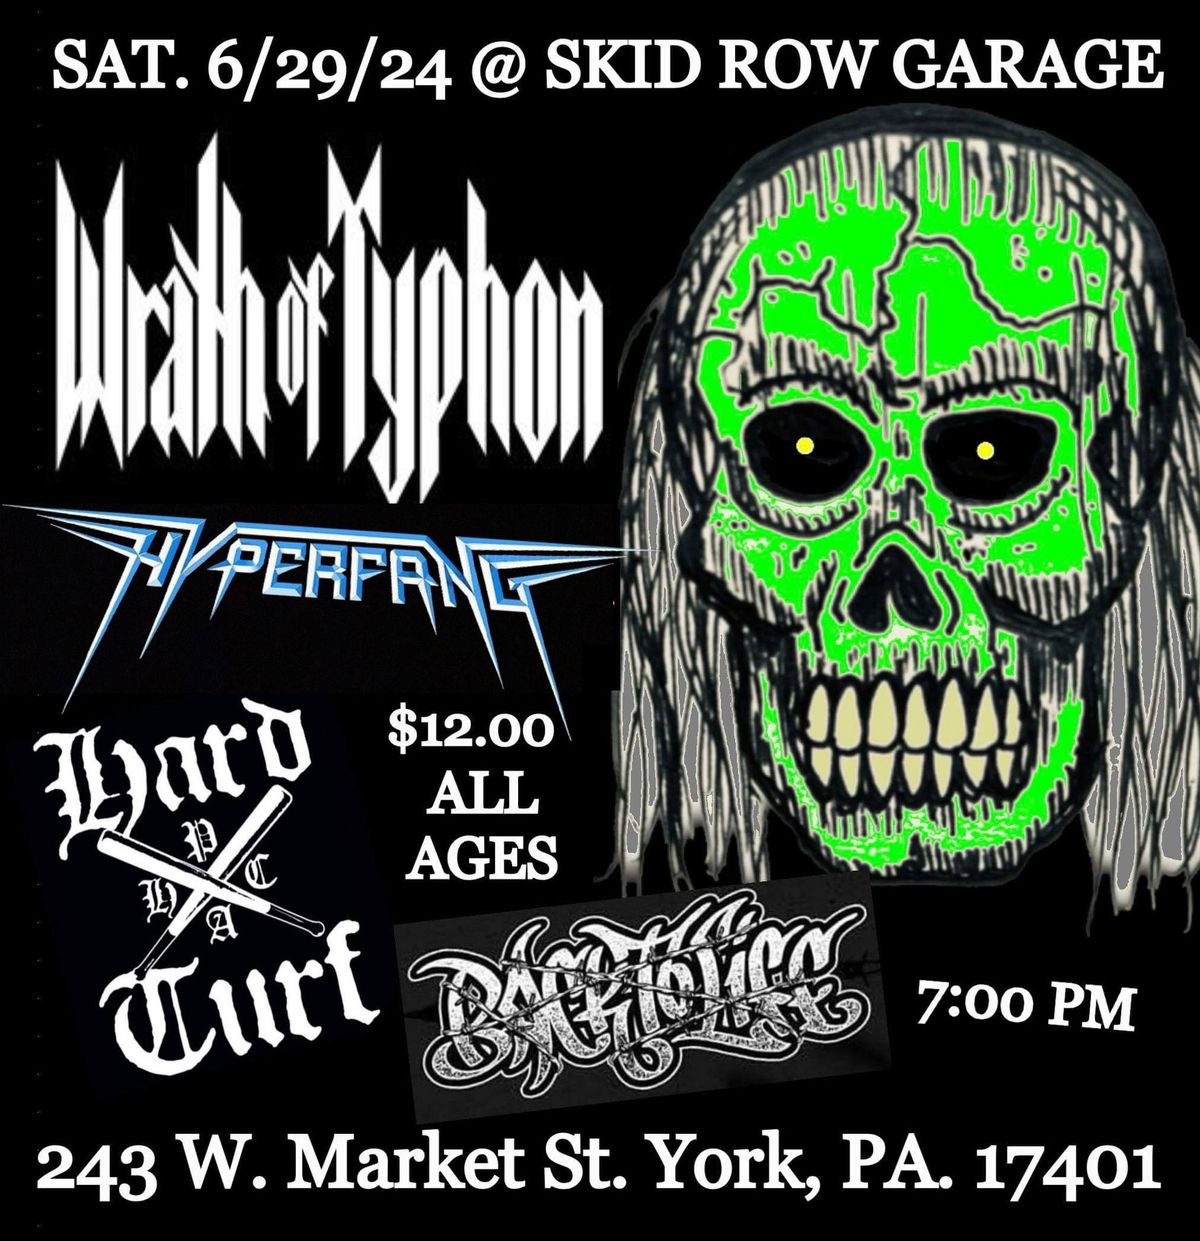 Wrath of Typhon, Deathcycle, Hard Turf, and Back to Life at Skid Row Garage